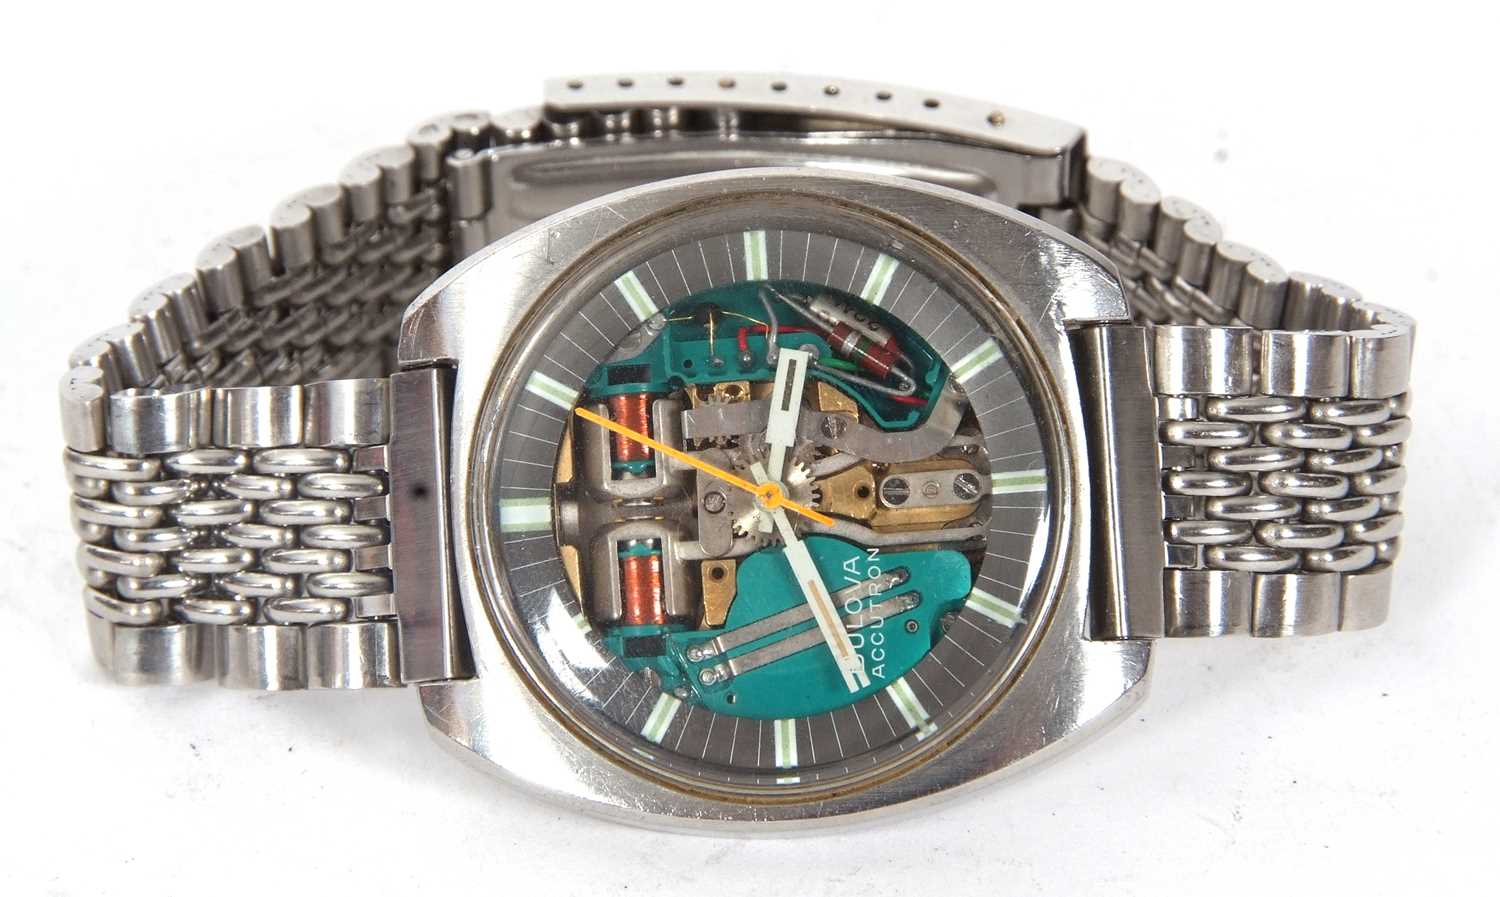 Belova Accutron Space View wristwatch, the watch has a quartz movement, present with the watch is